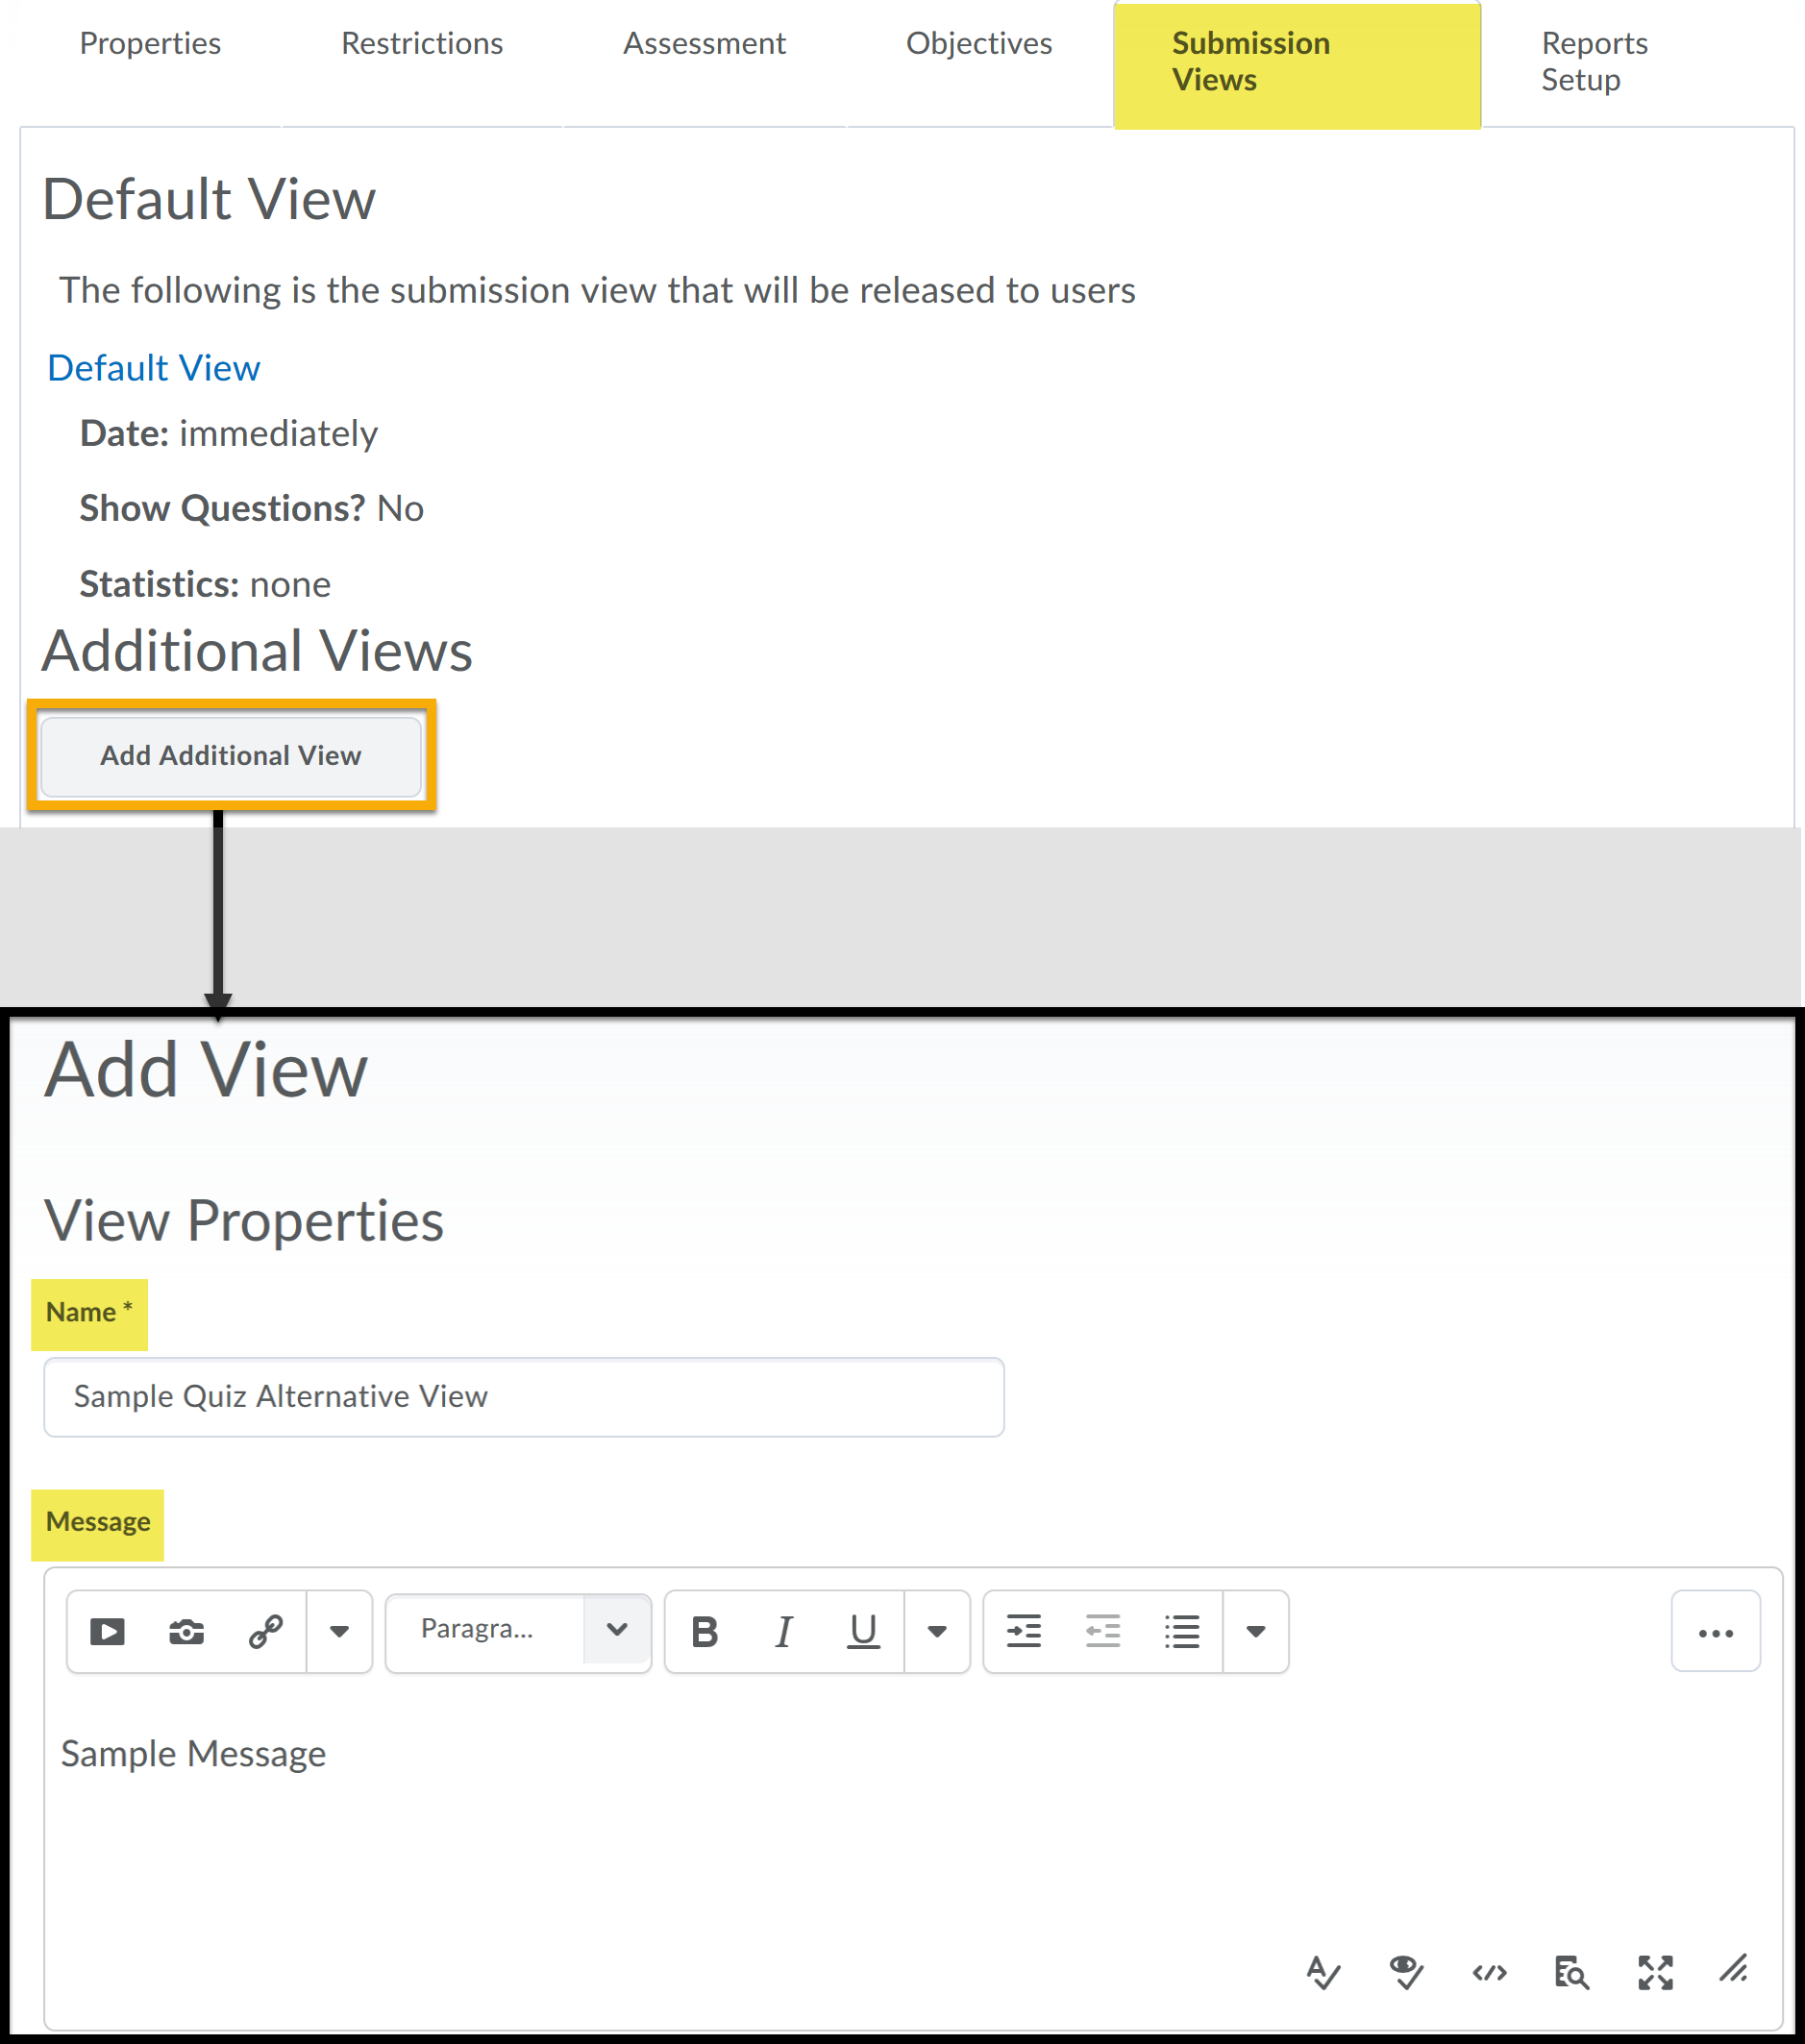 Under Submission Views, Add Another View is highlighted. An arrow points toward the Add View properties window with the Name and Message textboxes highlighted.